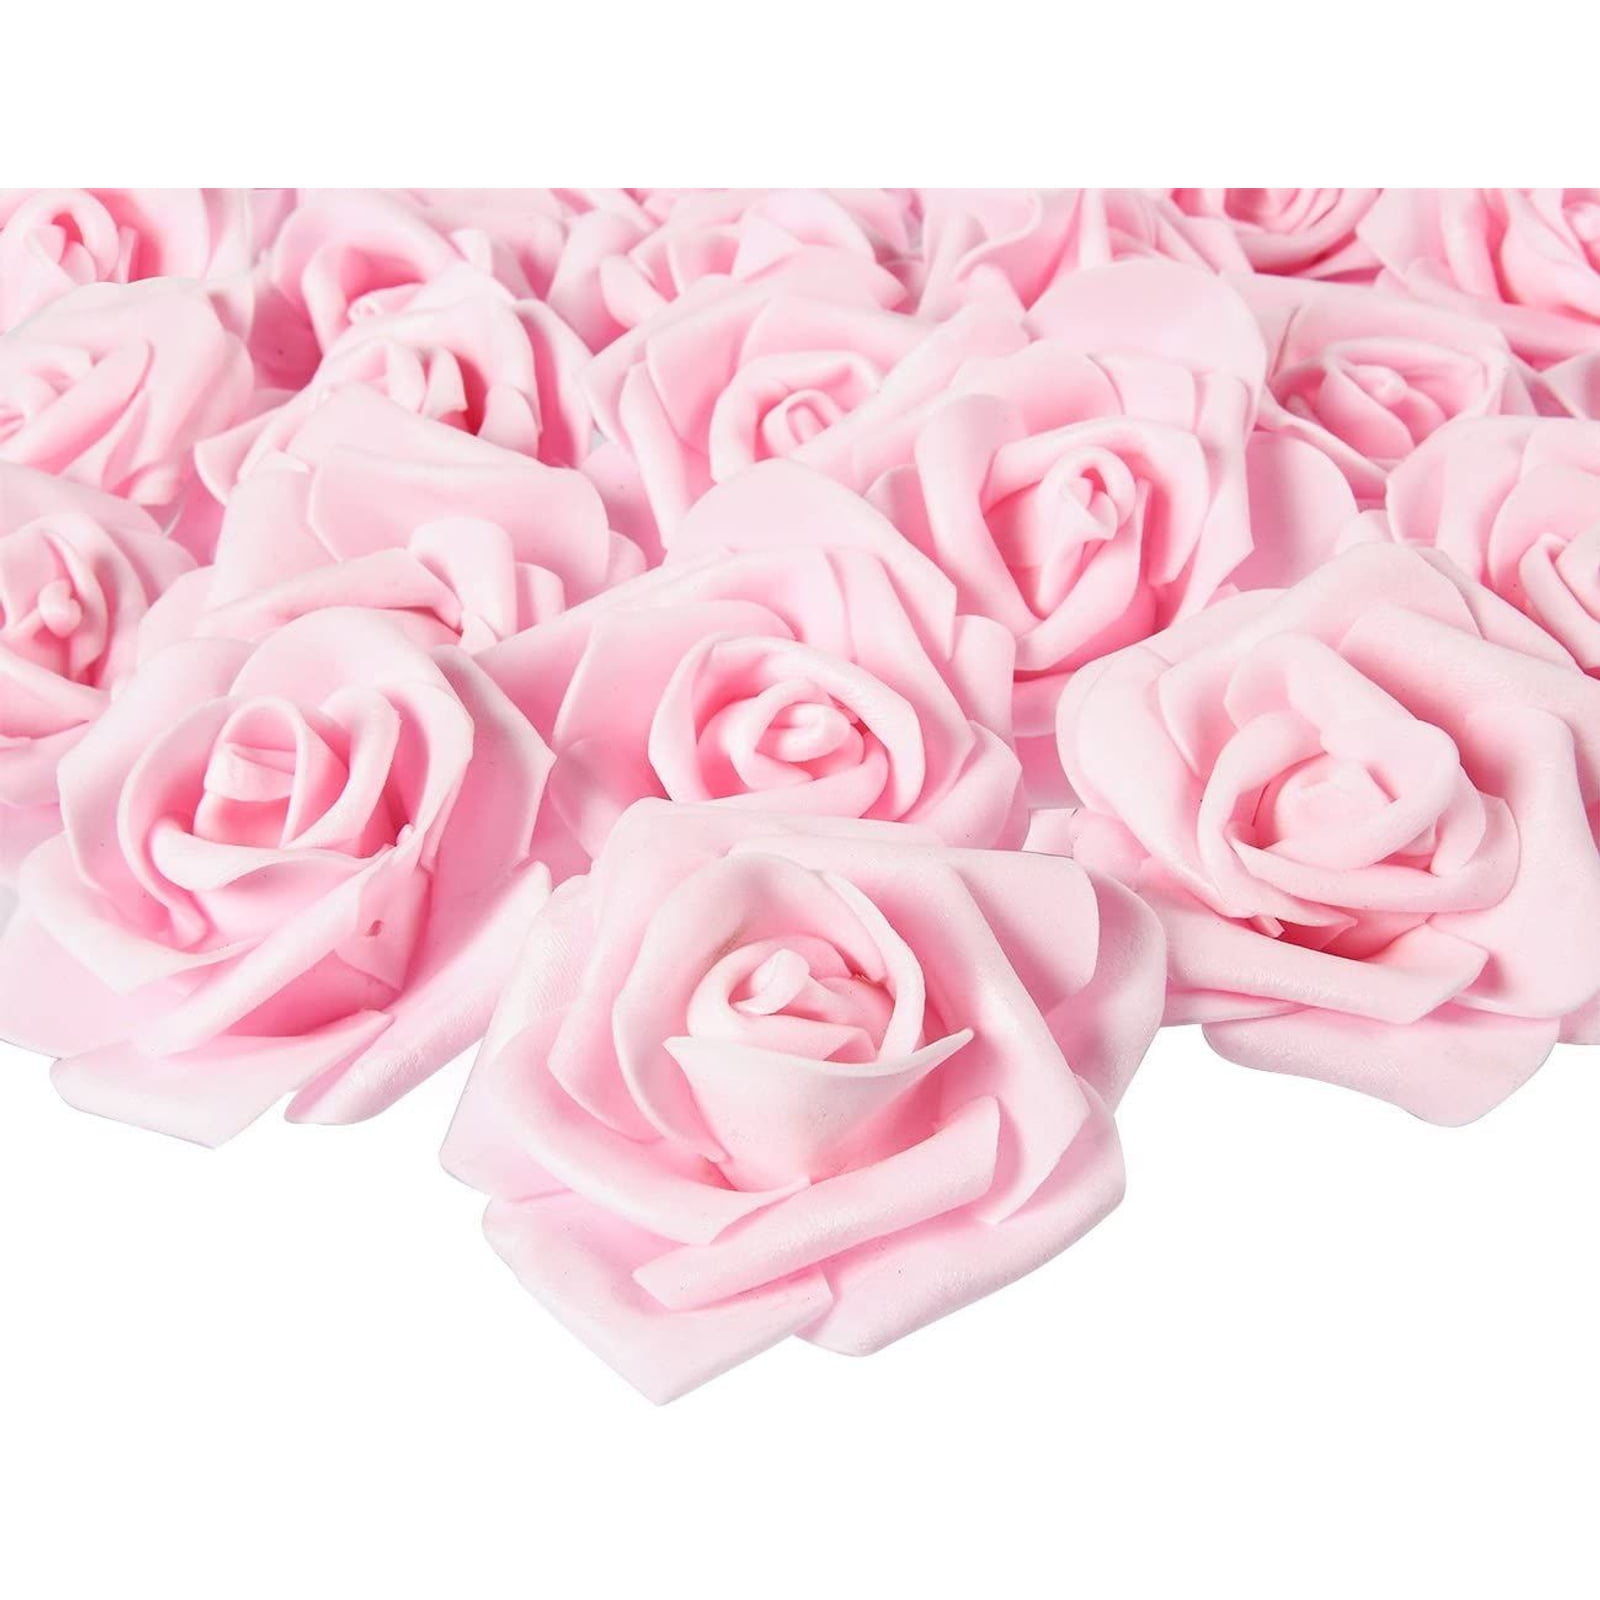 Hot Pink Roses Fake Flowers 3 inch Artificial Rose 100 pcs Wedding Bouquet Decor 